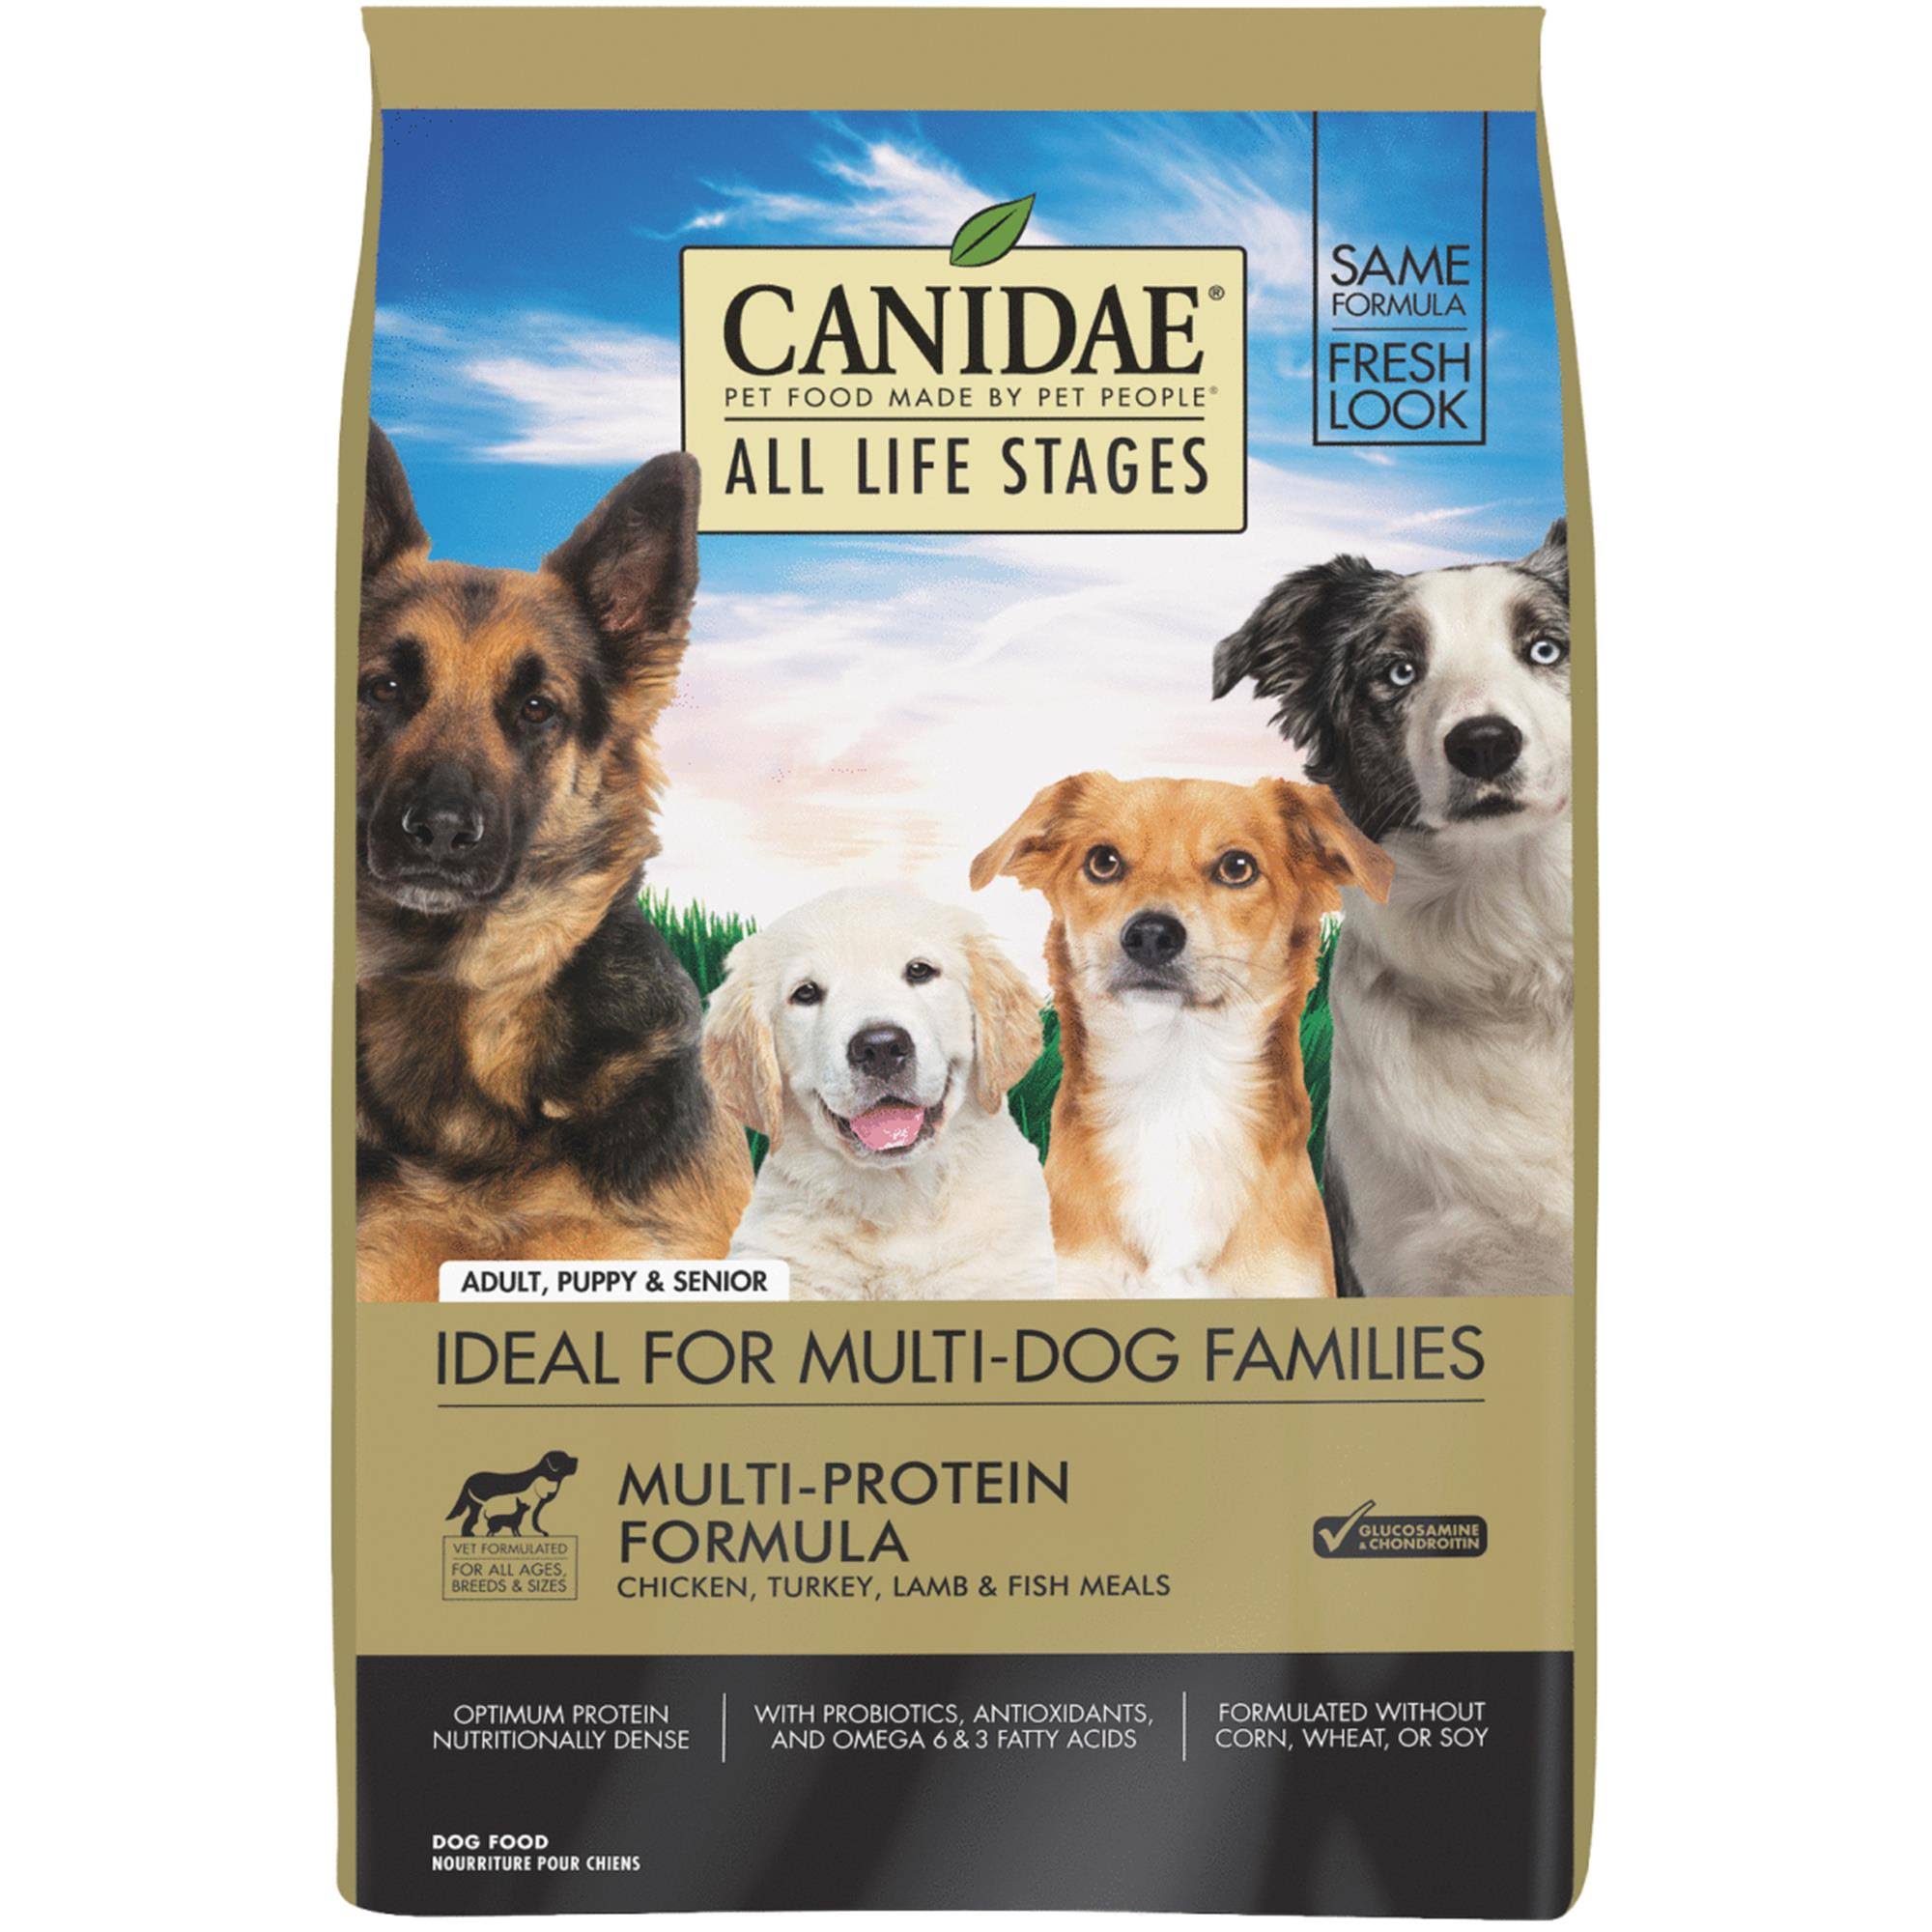 Canidae All Life Stages Formula Dry Dog Food - 5lb